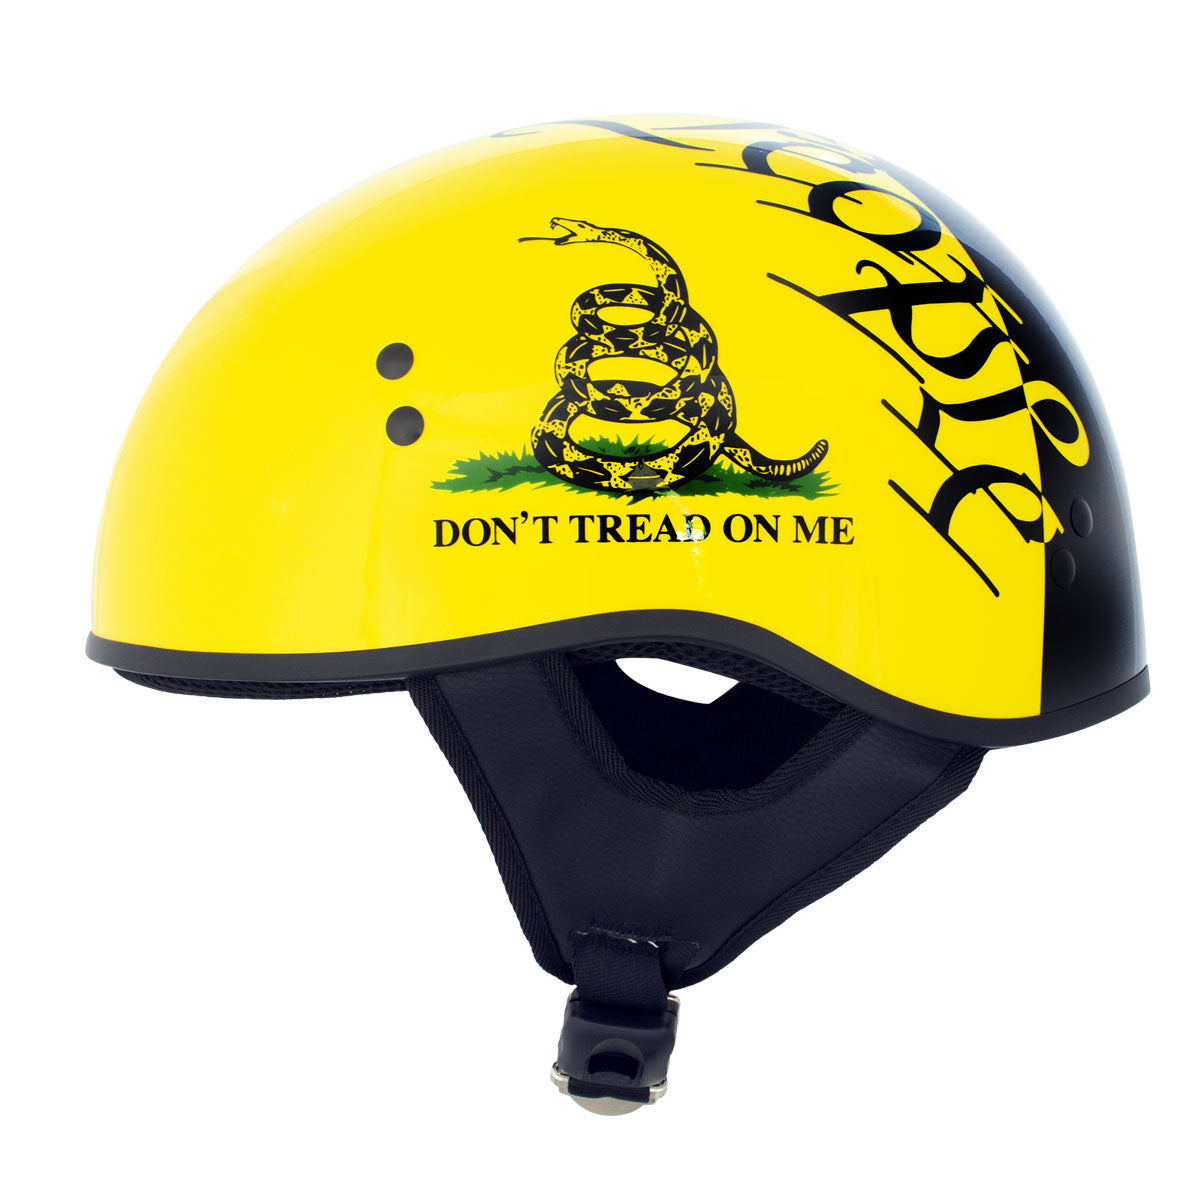 Hot Leathers HLD1046 Gloss Black and Yellow 'We The People' Advanced DOT Skull Half Helmet for Men and Women